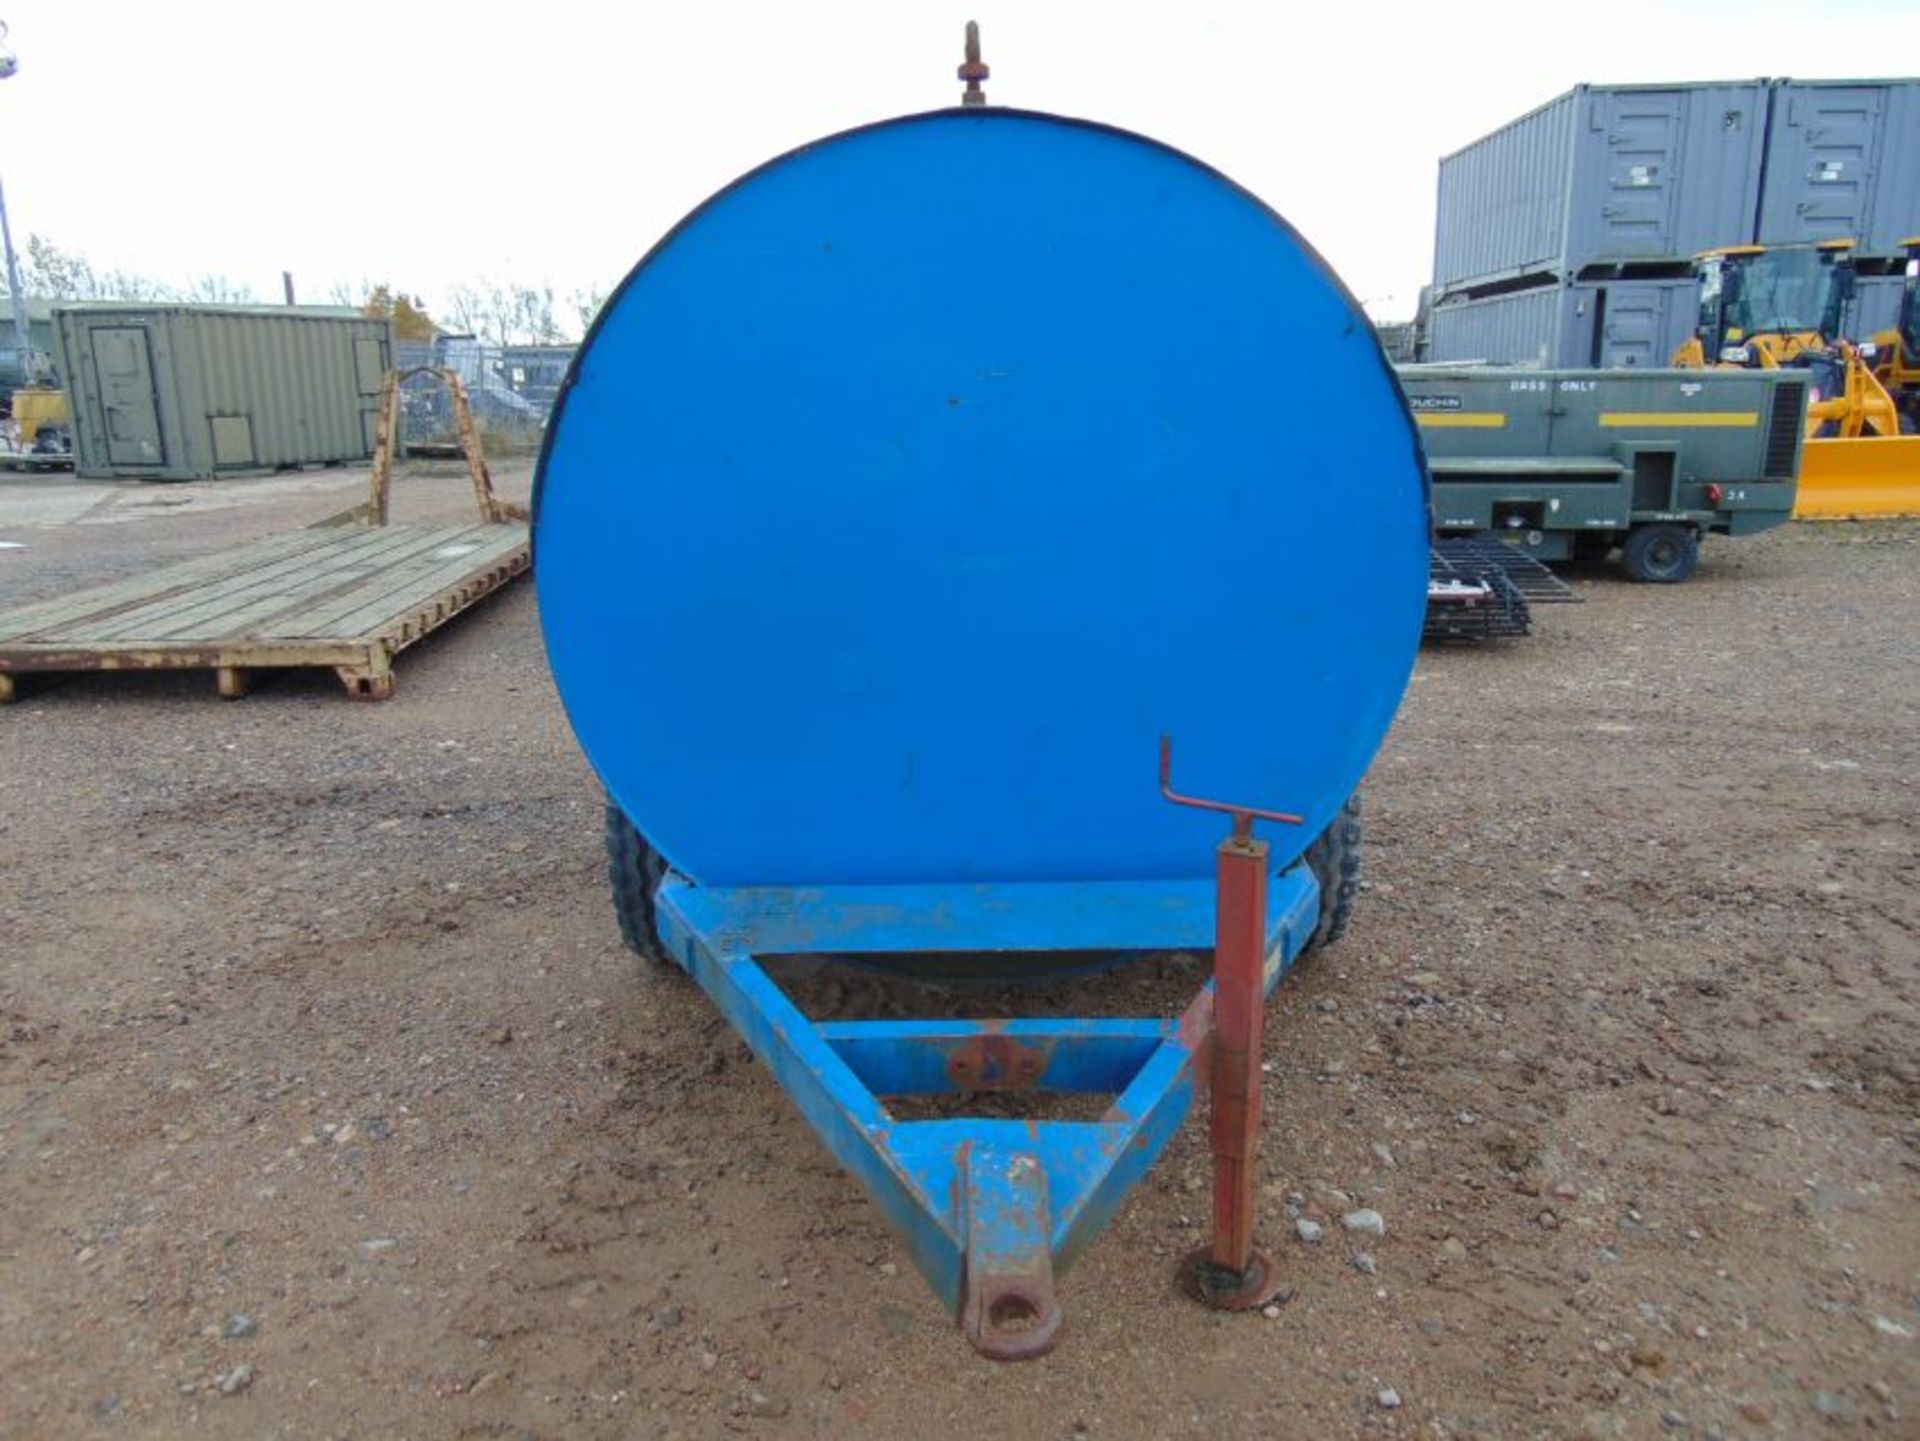 Trailer Engineering Single Axle 2140 Litre Towable Bunded Diesel Fuel Bowser - Image 2 of 10